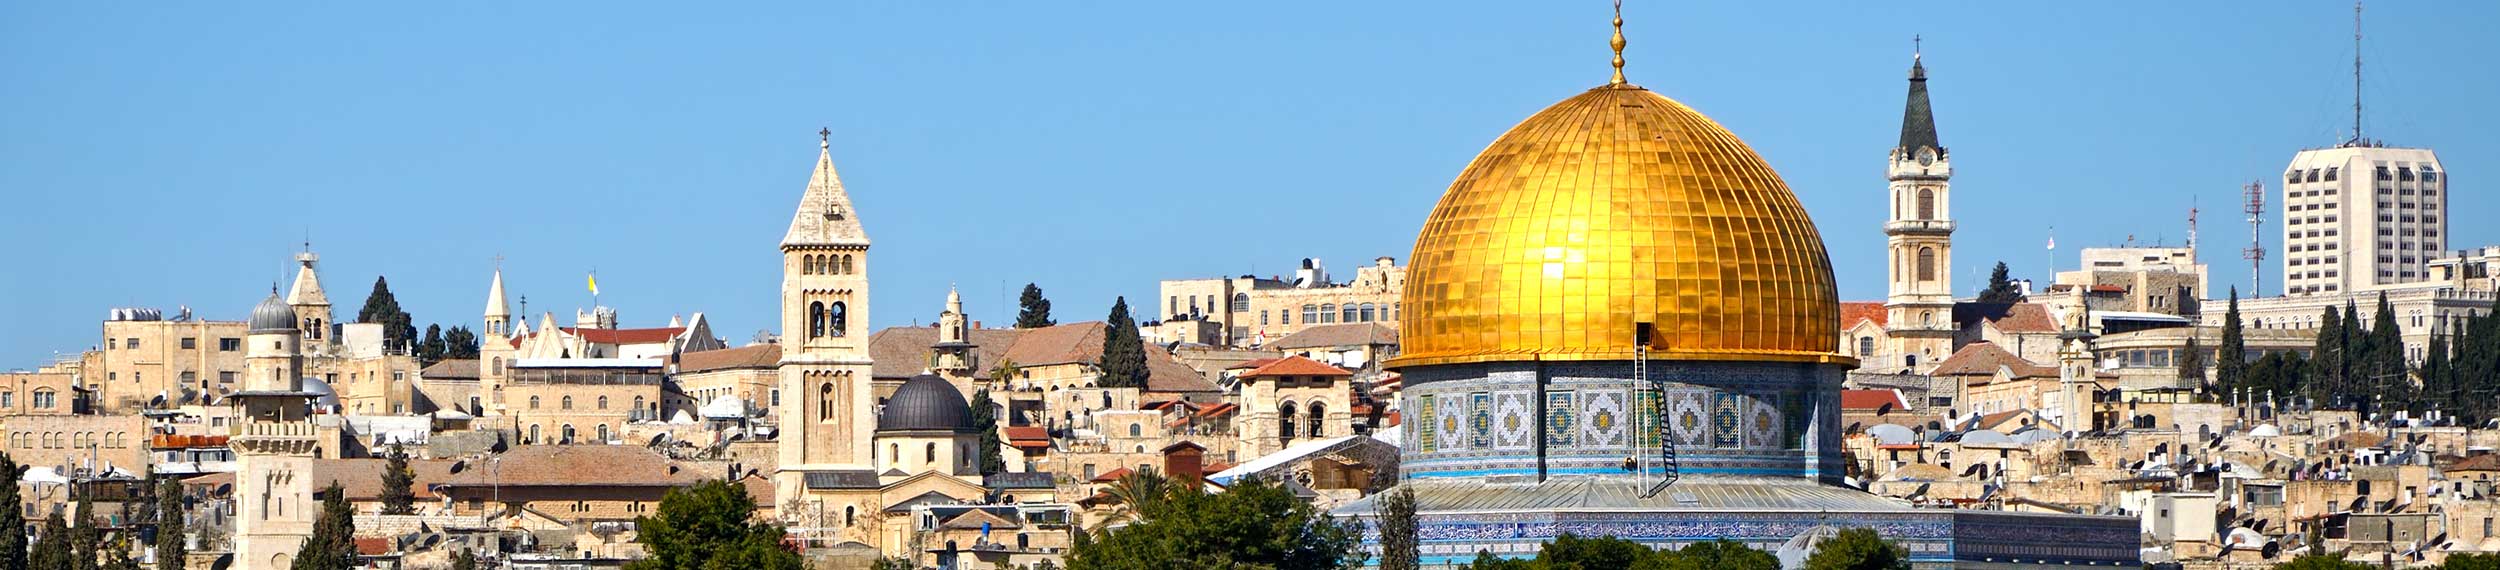 Dome of the Rock from Mount of Olives, Jerusalem.